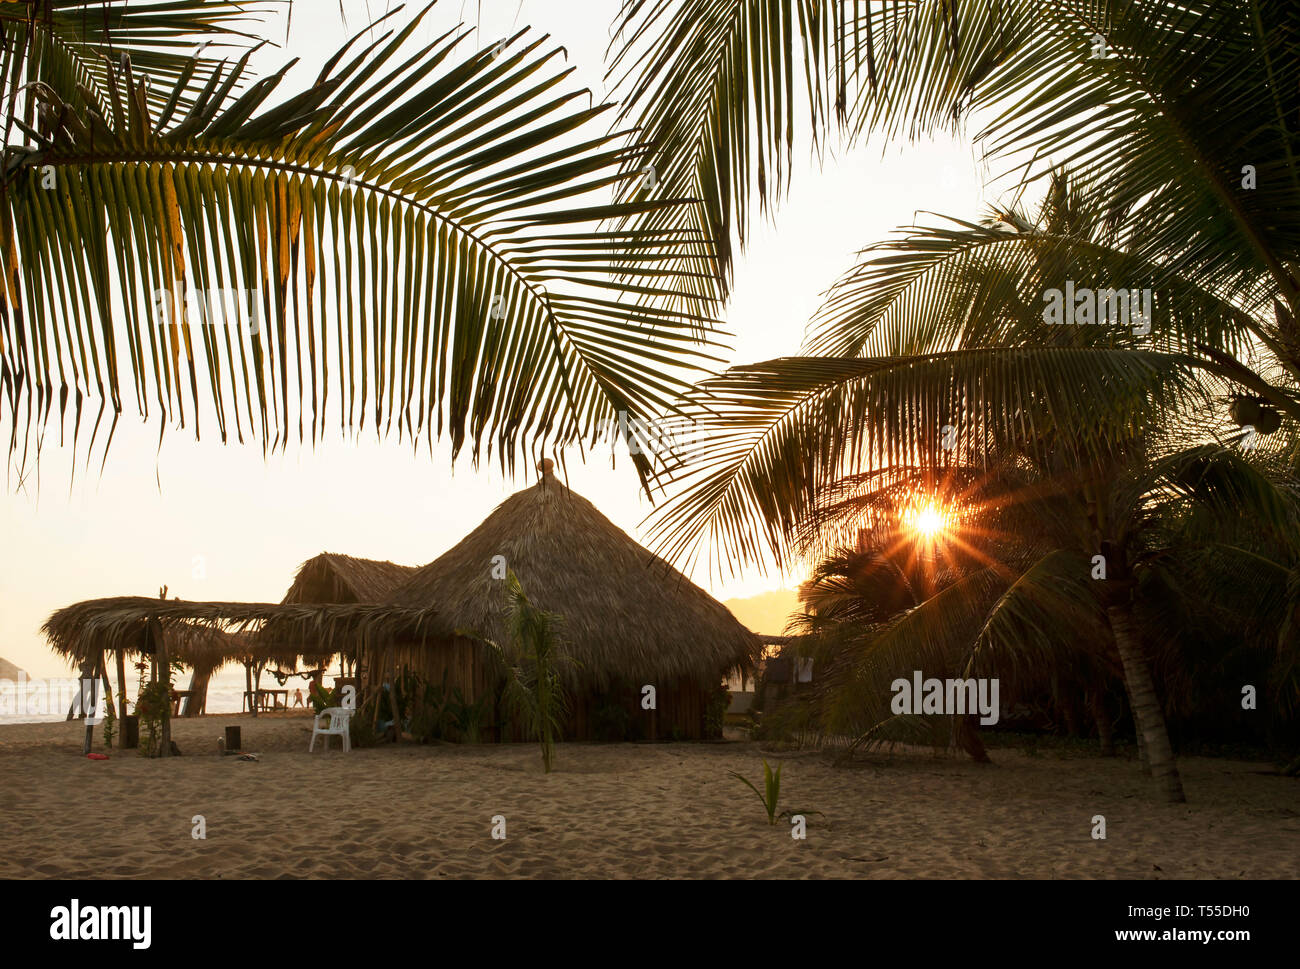 Lush palm trees, thatched-roofed cabins (cabañas) for tourists lodging on the tropical beach of Zipolite. Oaxaca State, Mexico. Apr 2019 Stock Photo